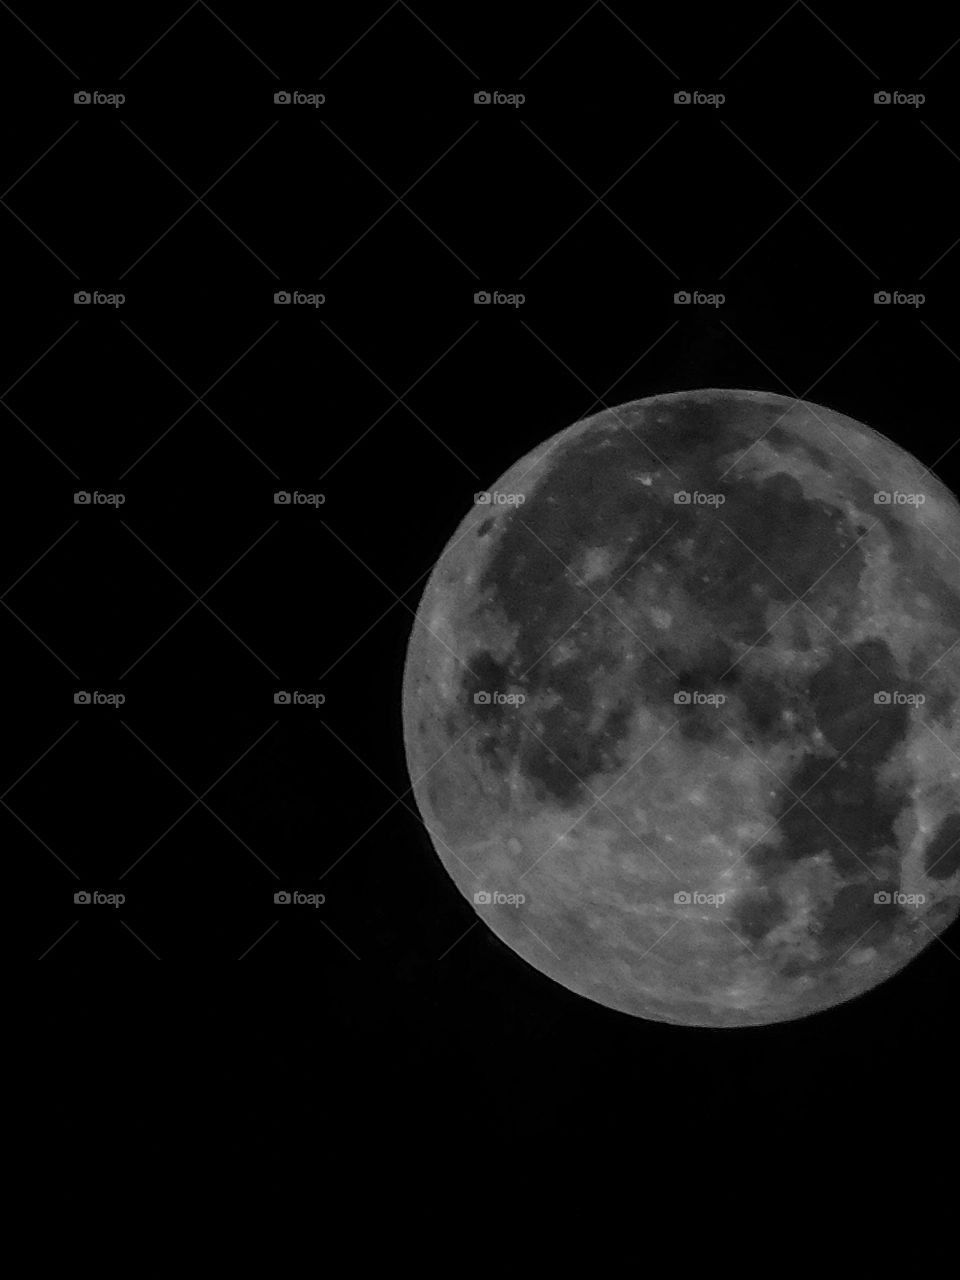 Full moon with Dark Black background having detail structure.